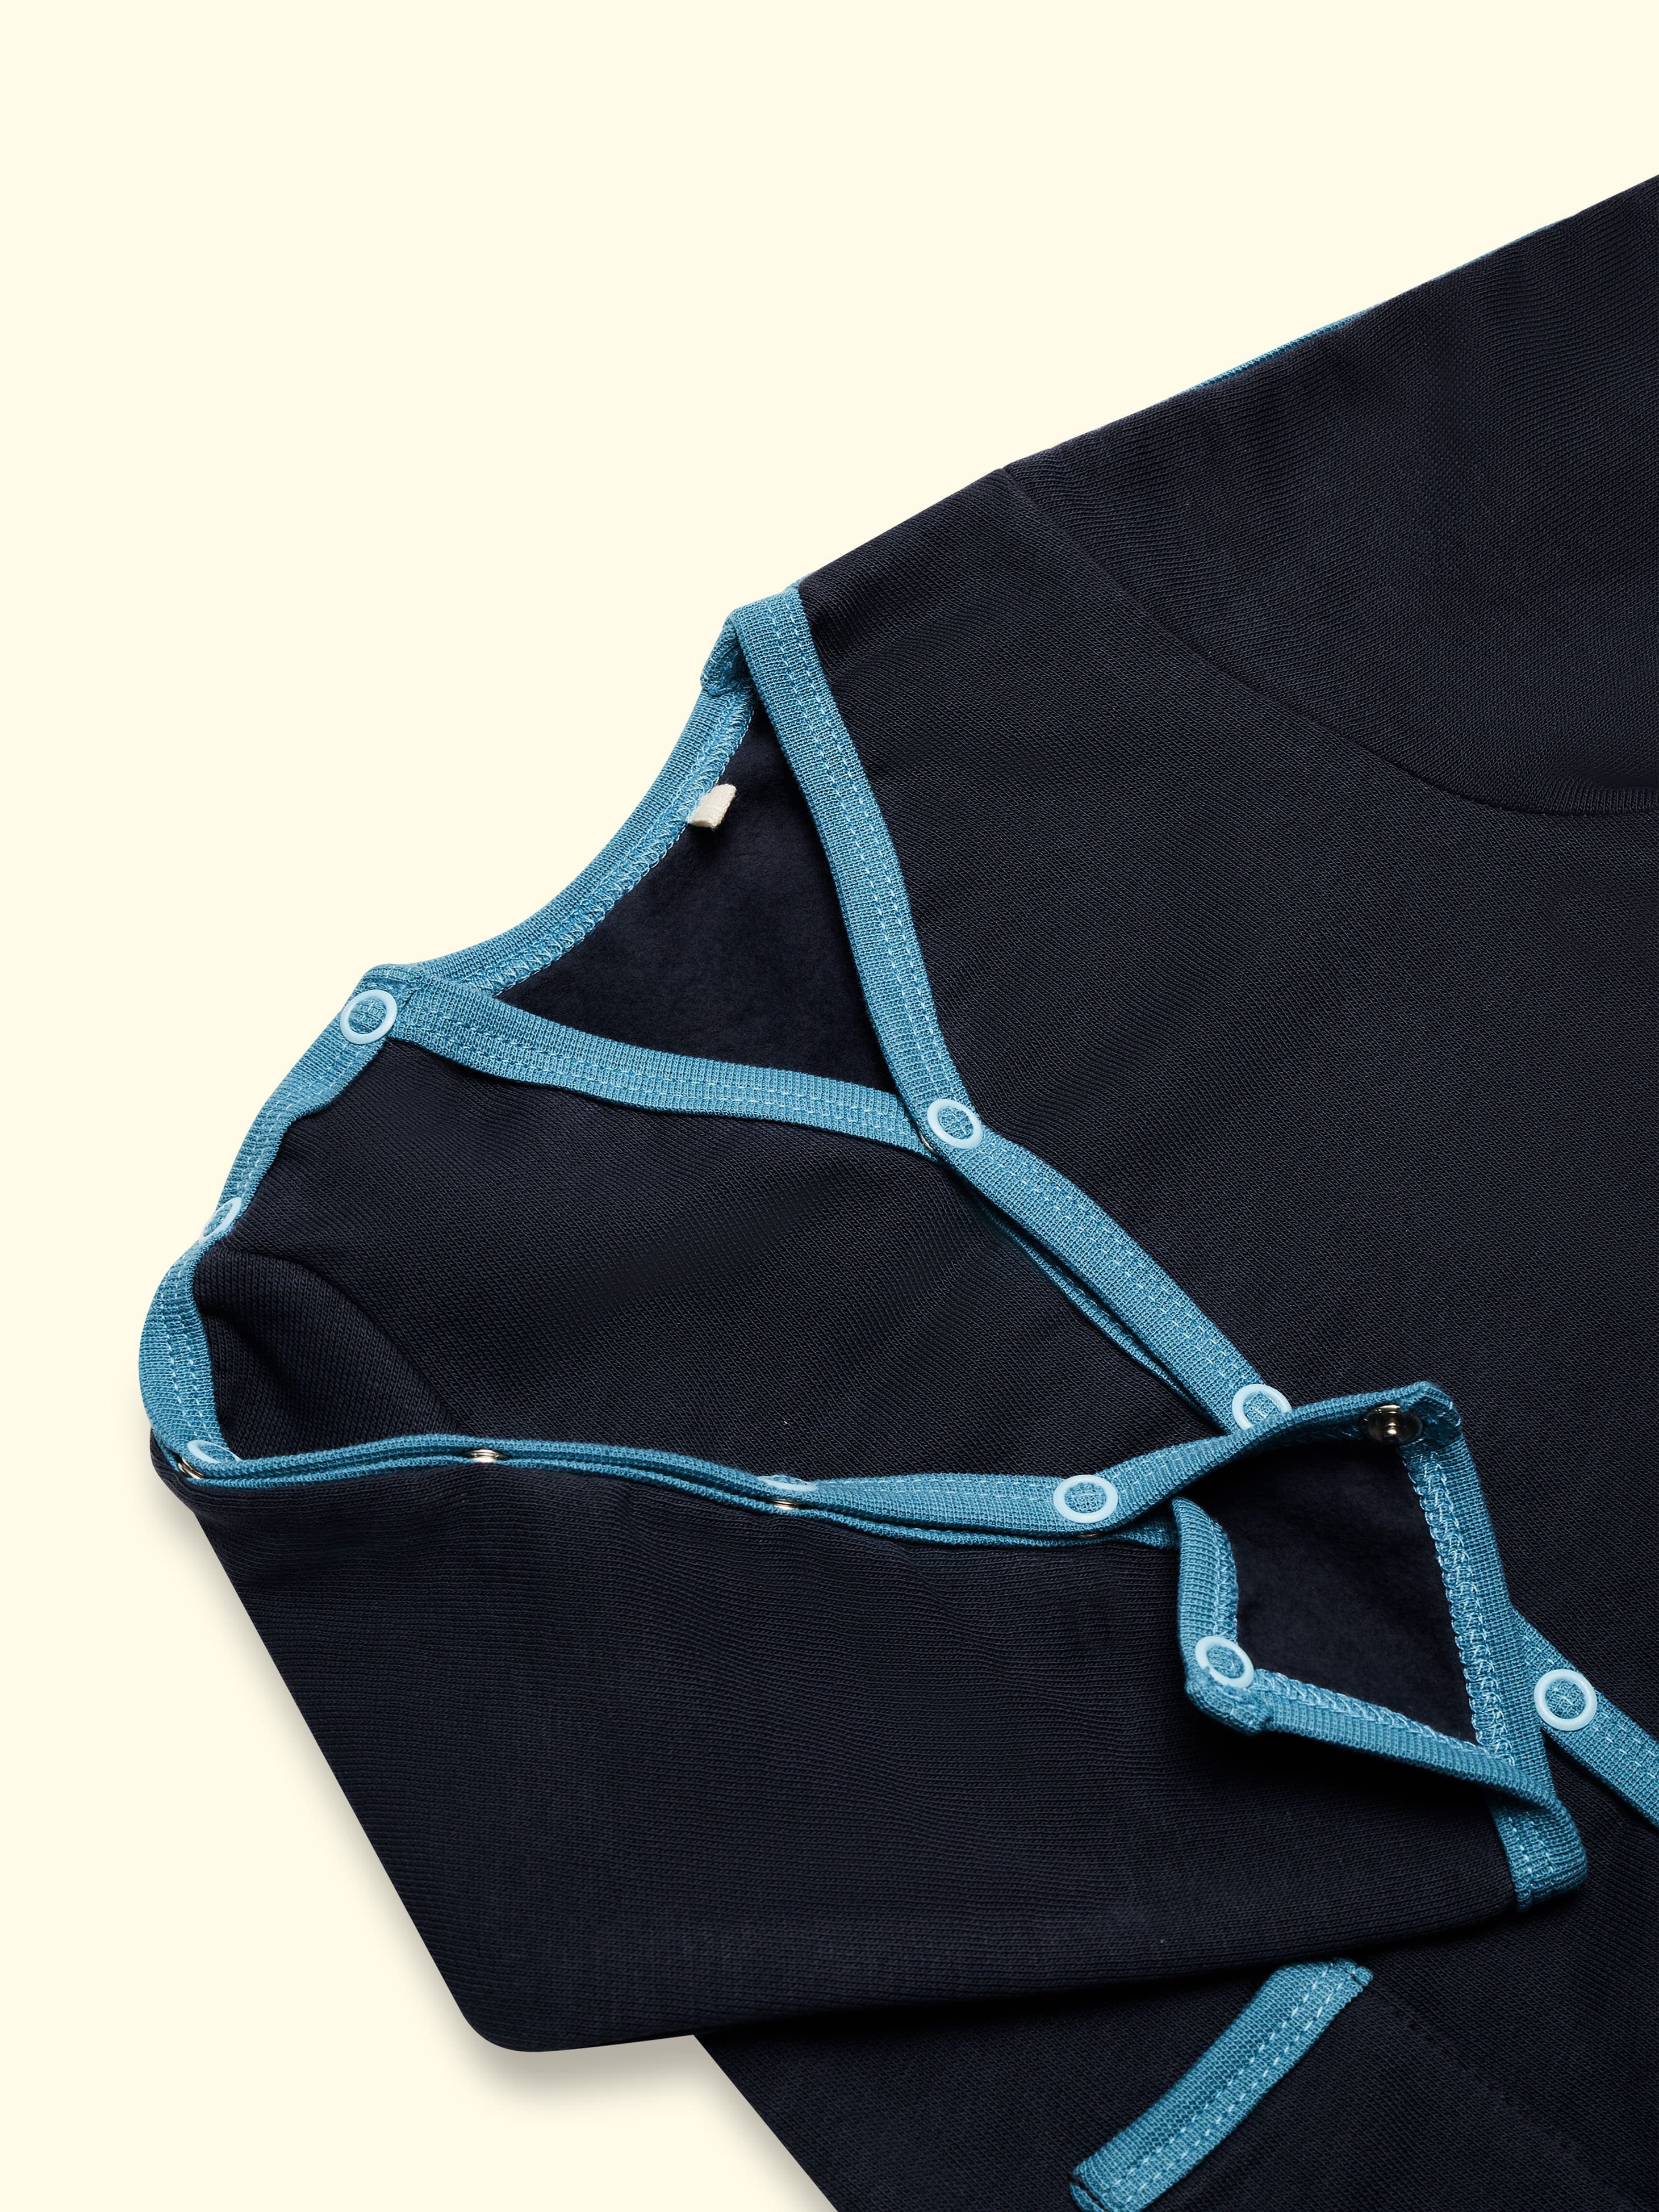 Adaptive sweat jacket, also for premature babies